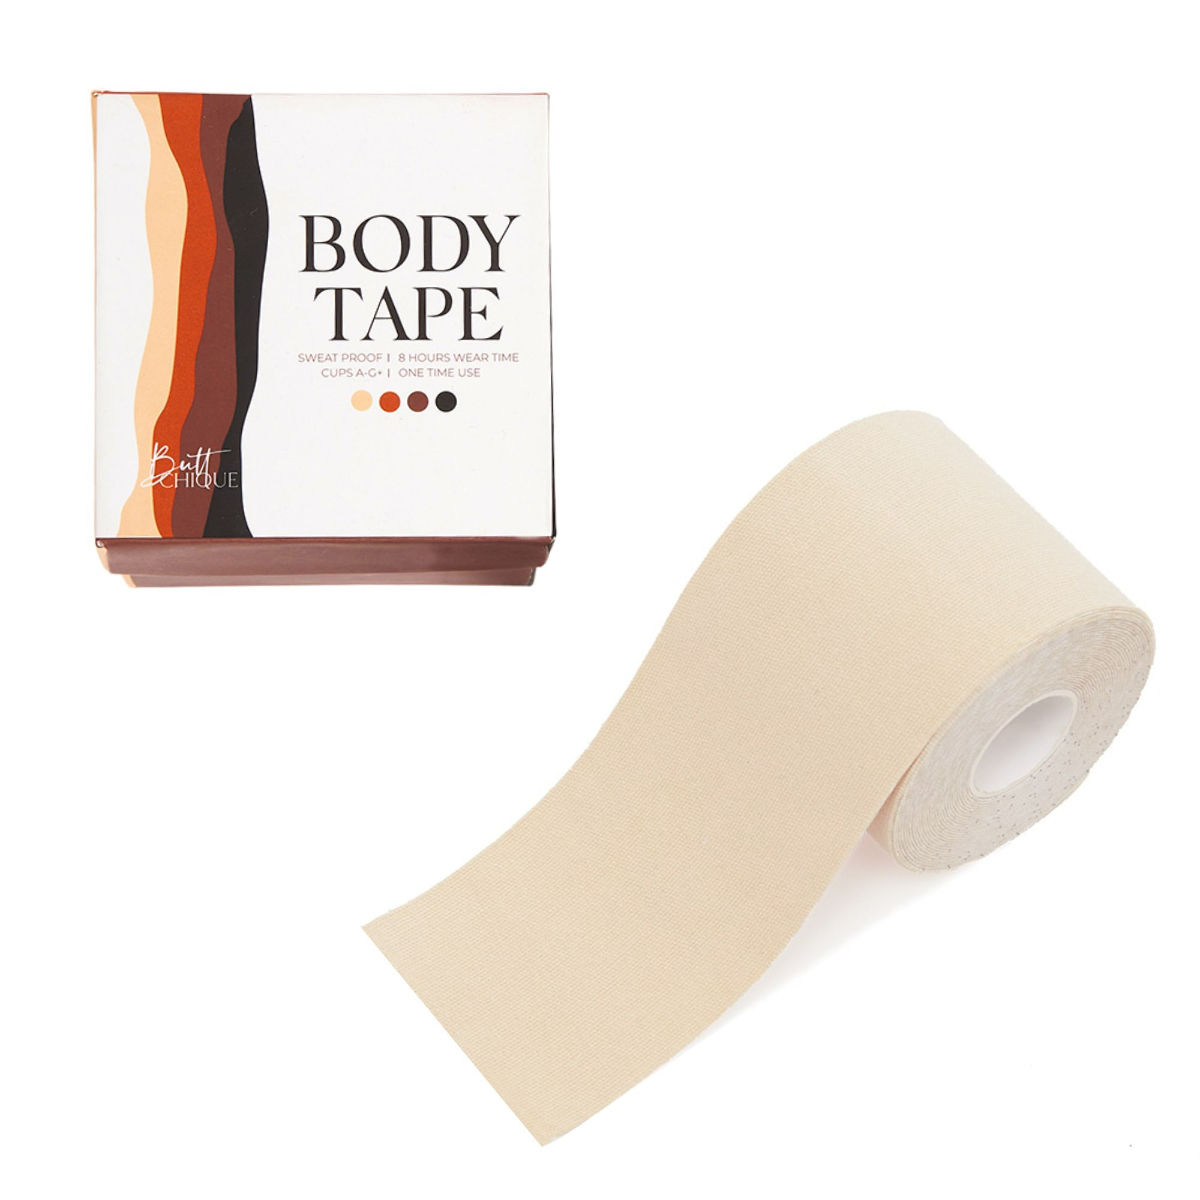 BUTTCHIQUE Breast Lift Body Tape (5 Meter Roll), Lifts Your Breasts, Gives  The Perfect Cleavage & Supports from All Directions, Lasts Upto 8-10 Hours